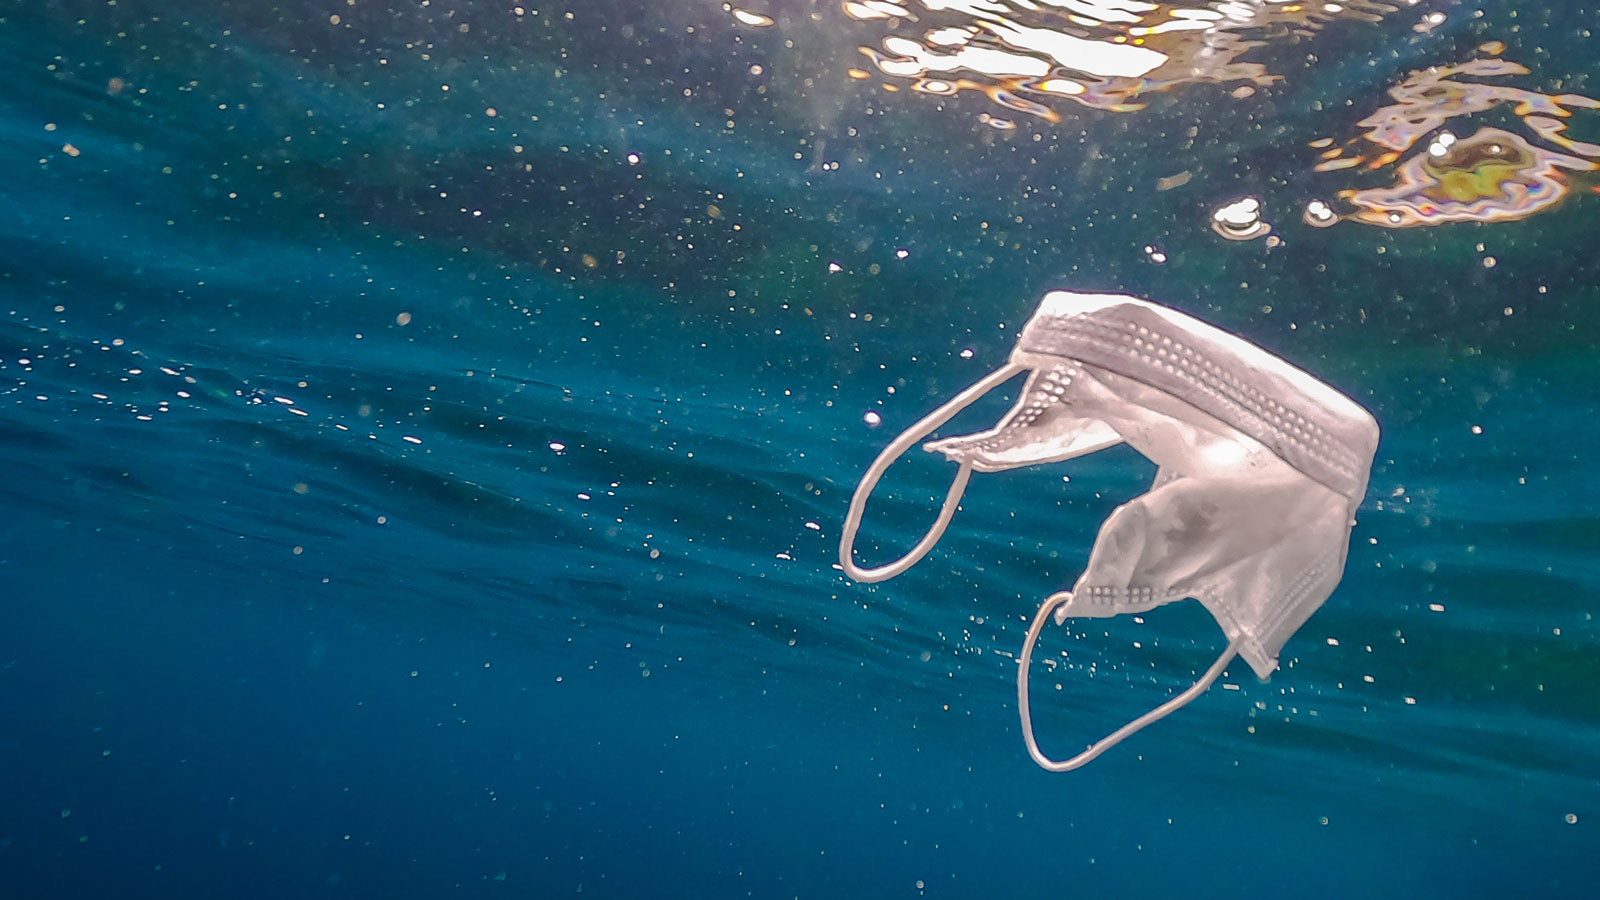 Yes, disposable masks are made of plastic. And that's a problem.